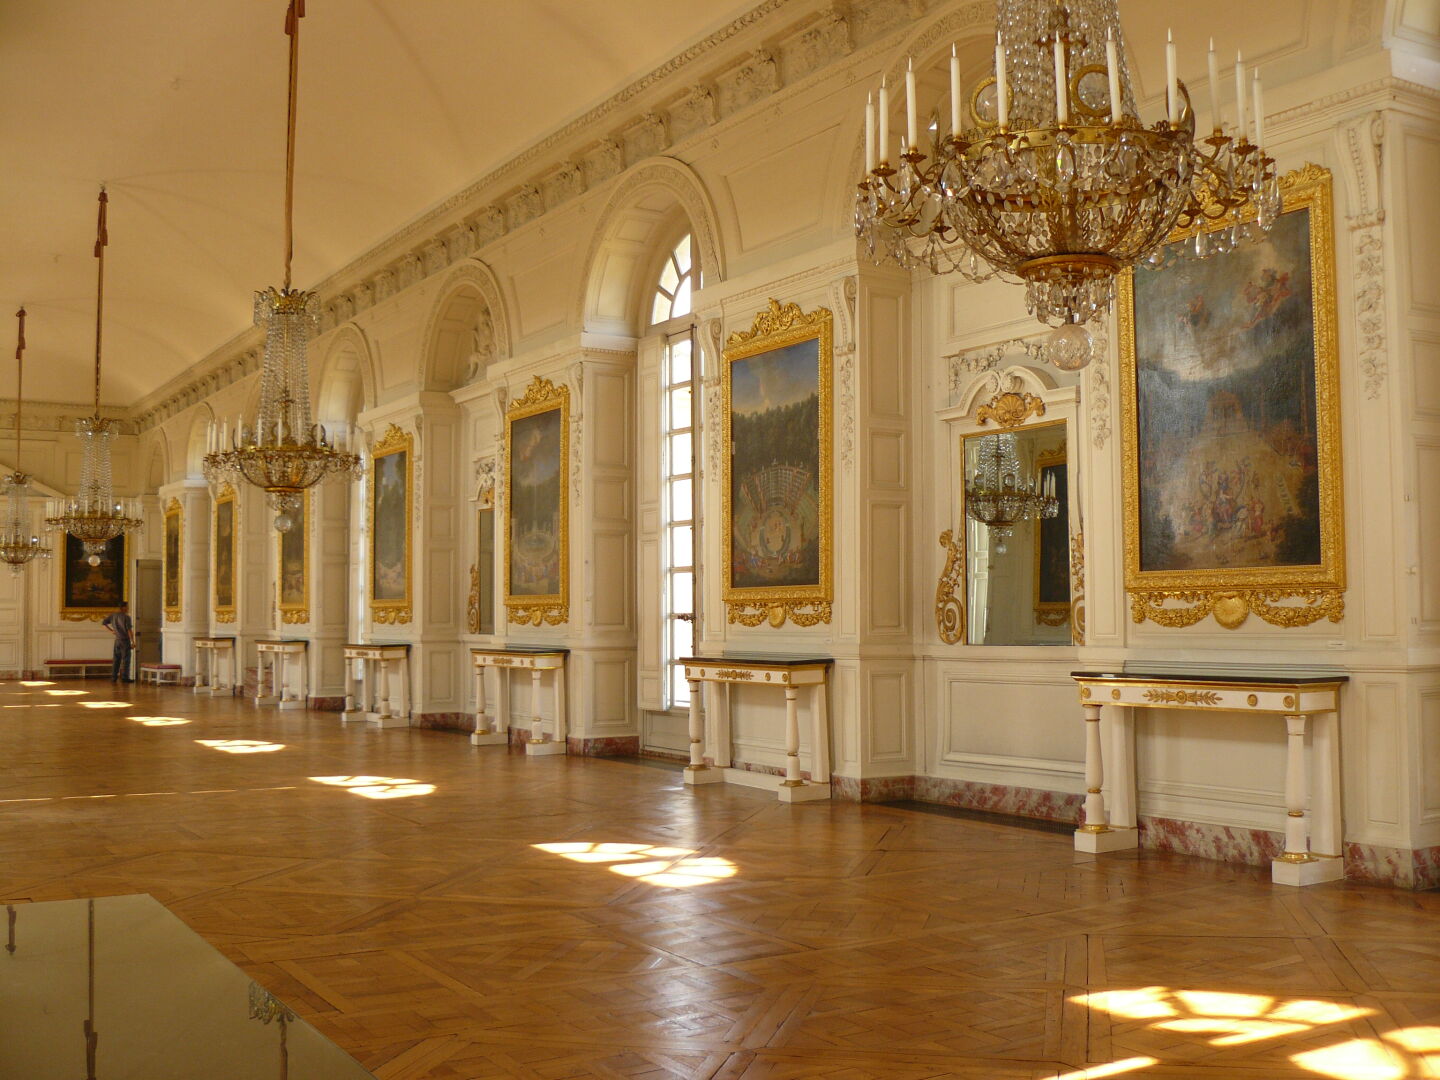 Gallery of paintings in the Grand Trianon